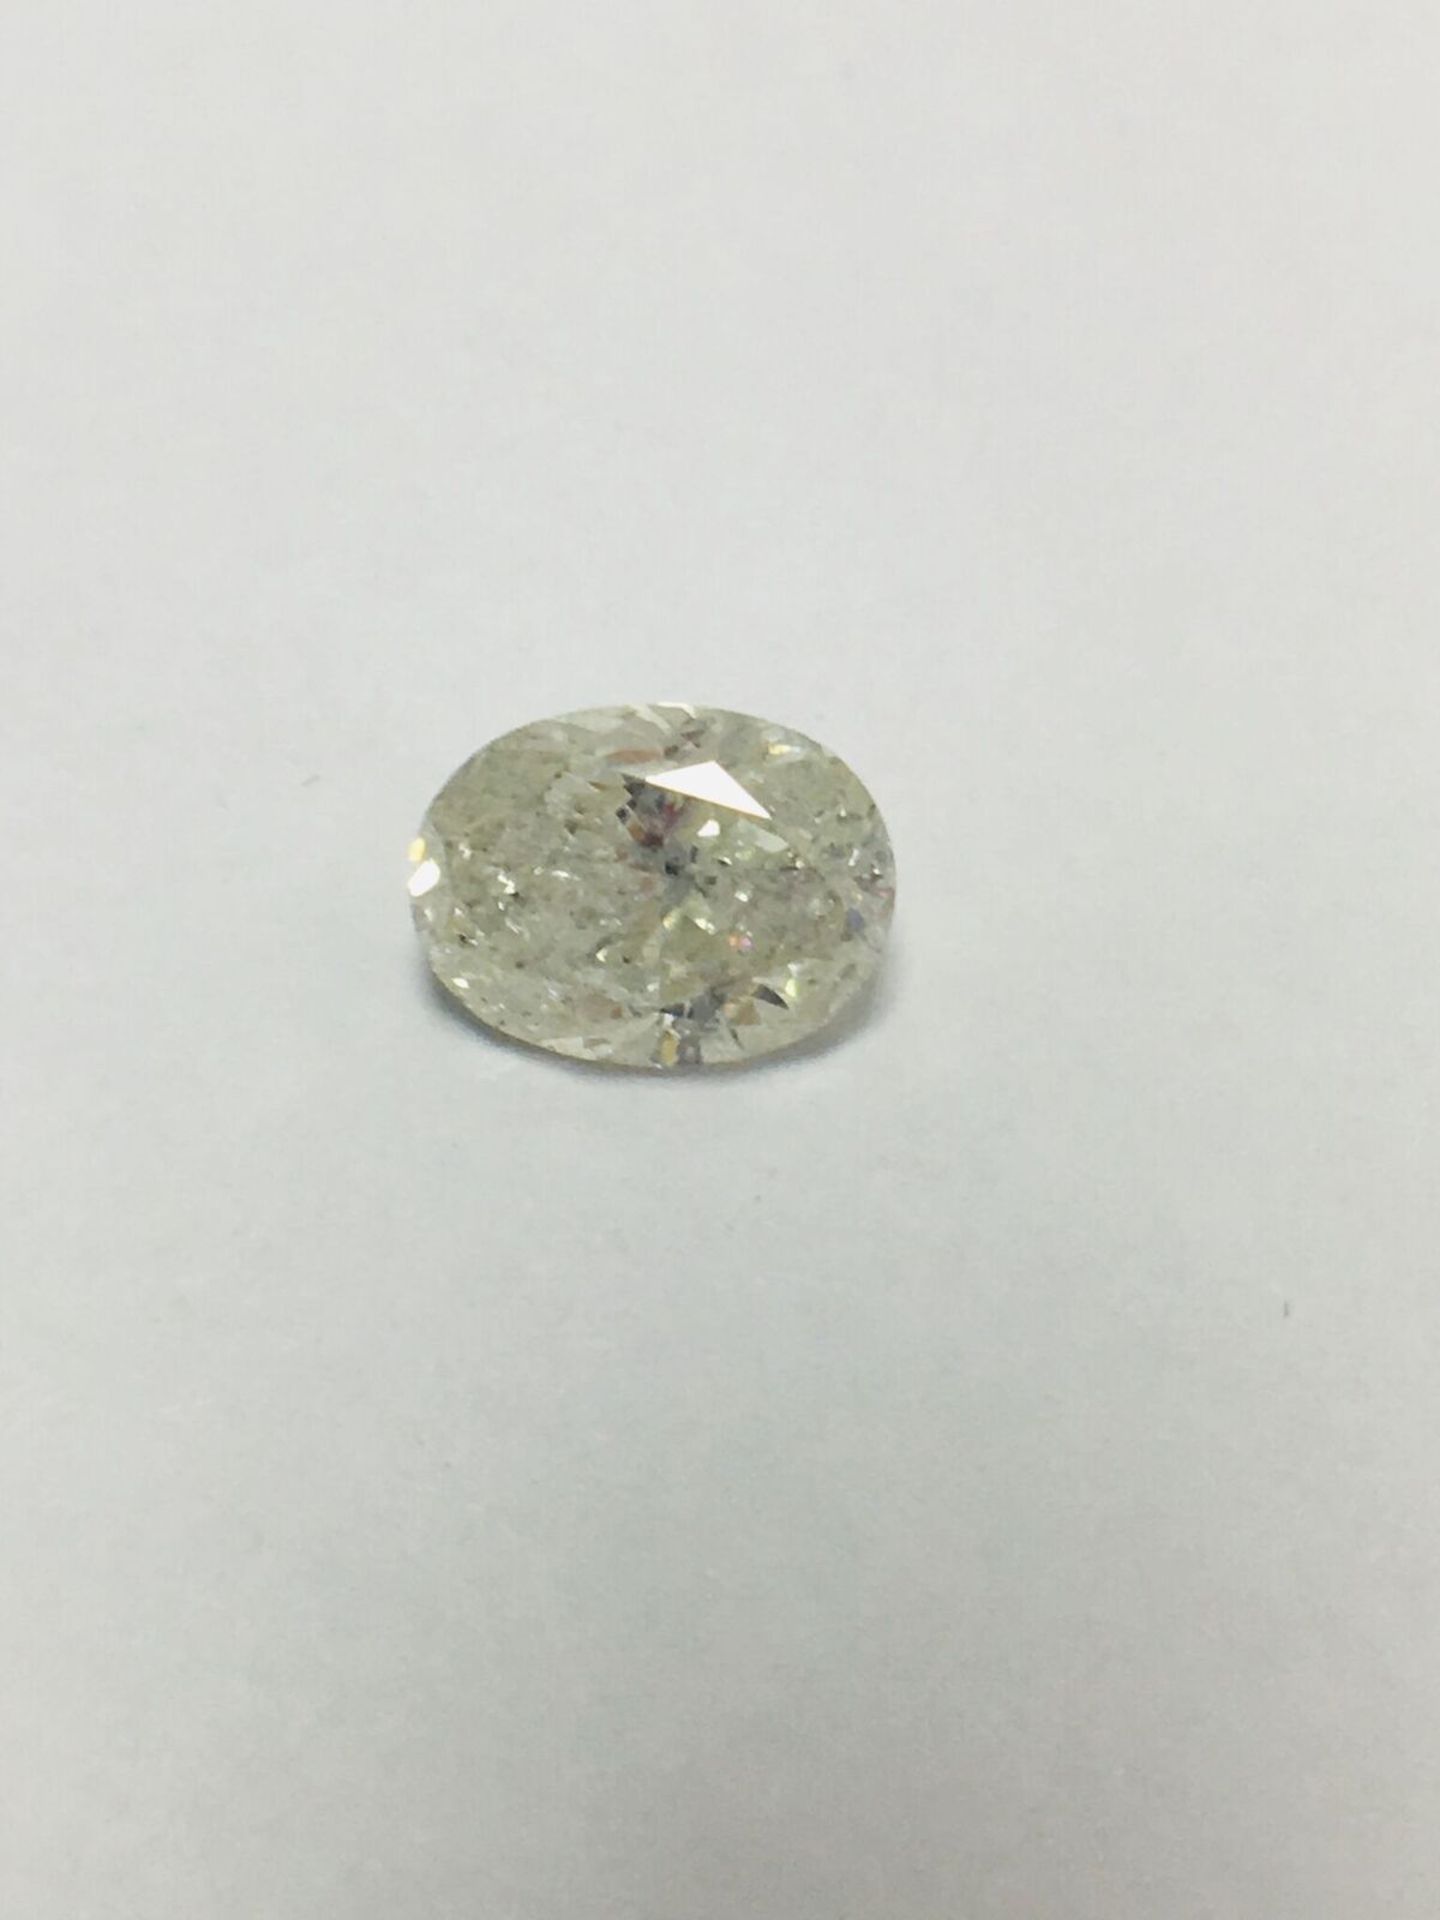 1.61T Natural Oval Cut Diamond - Image 3 of 3